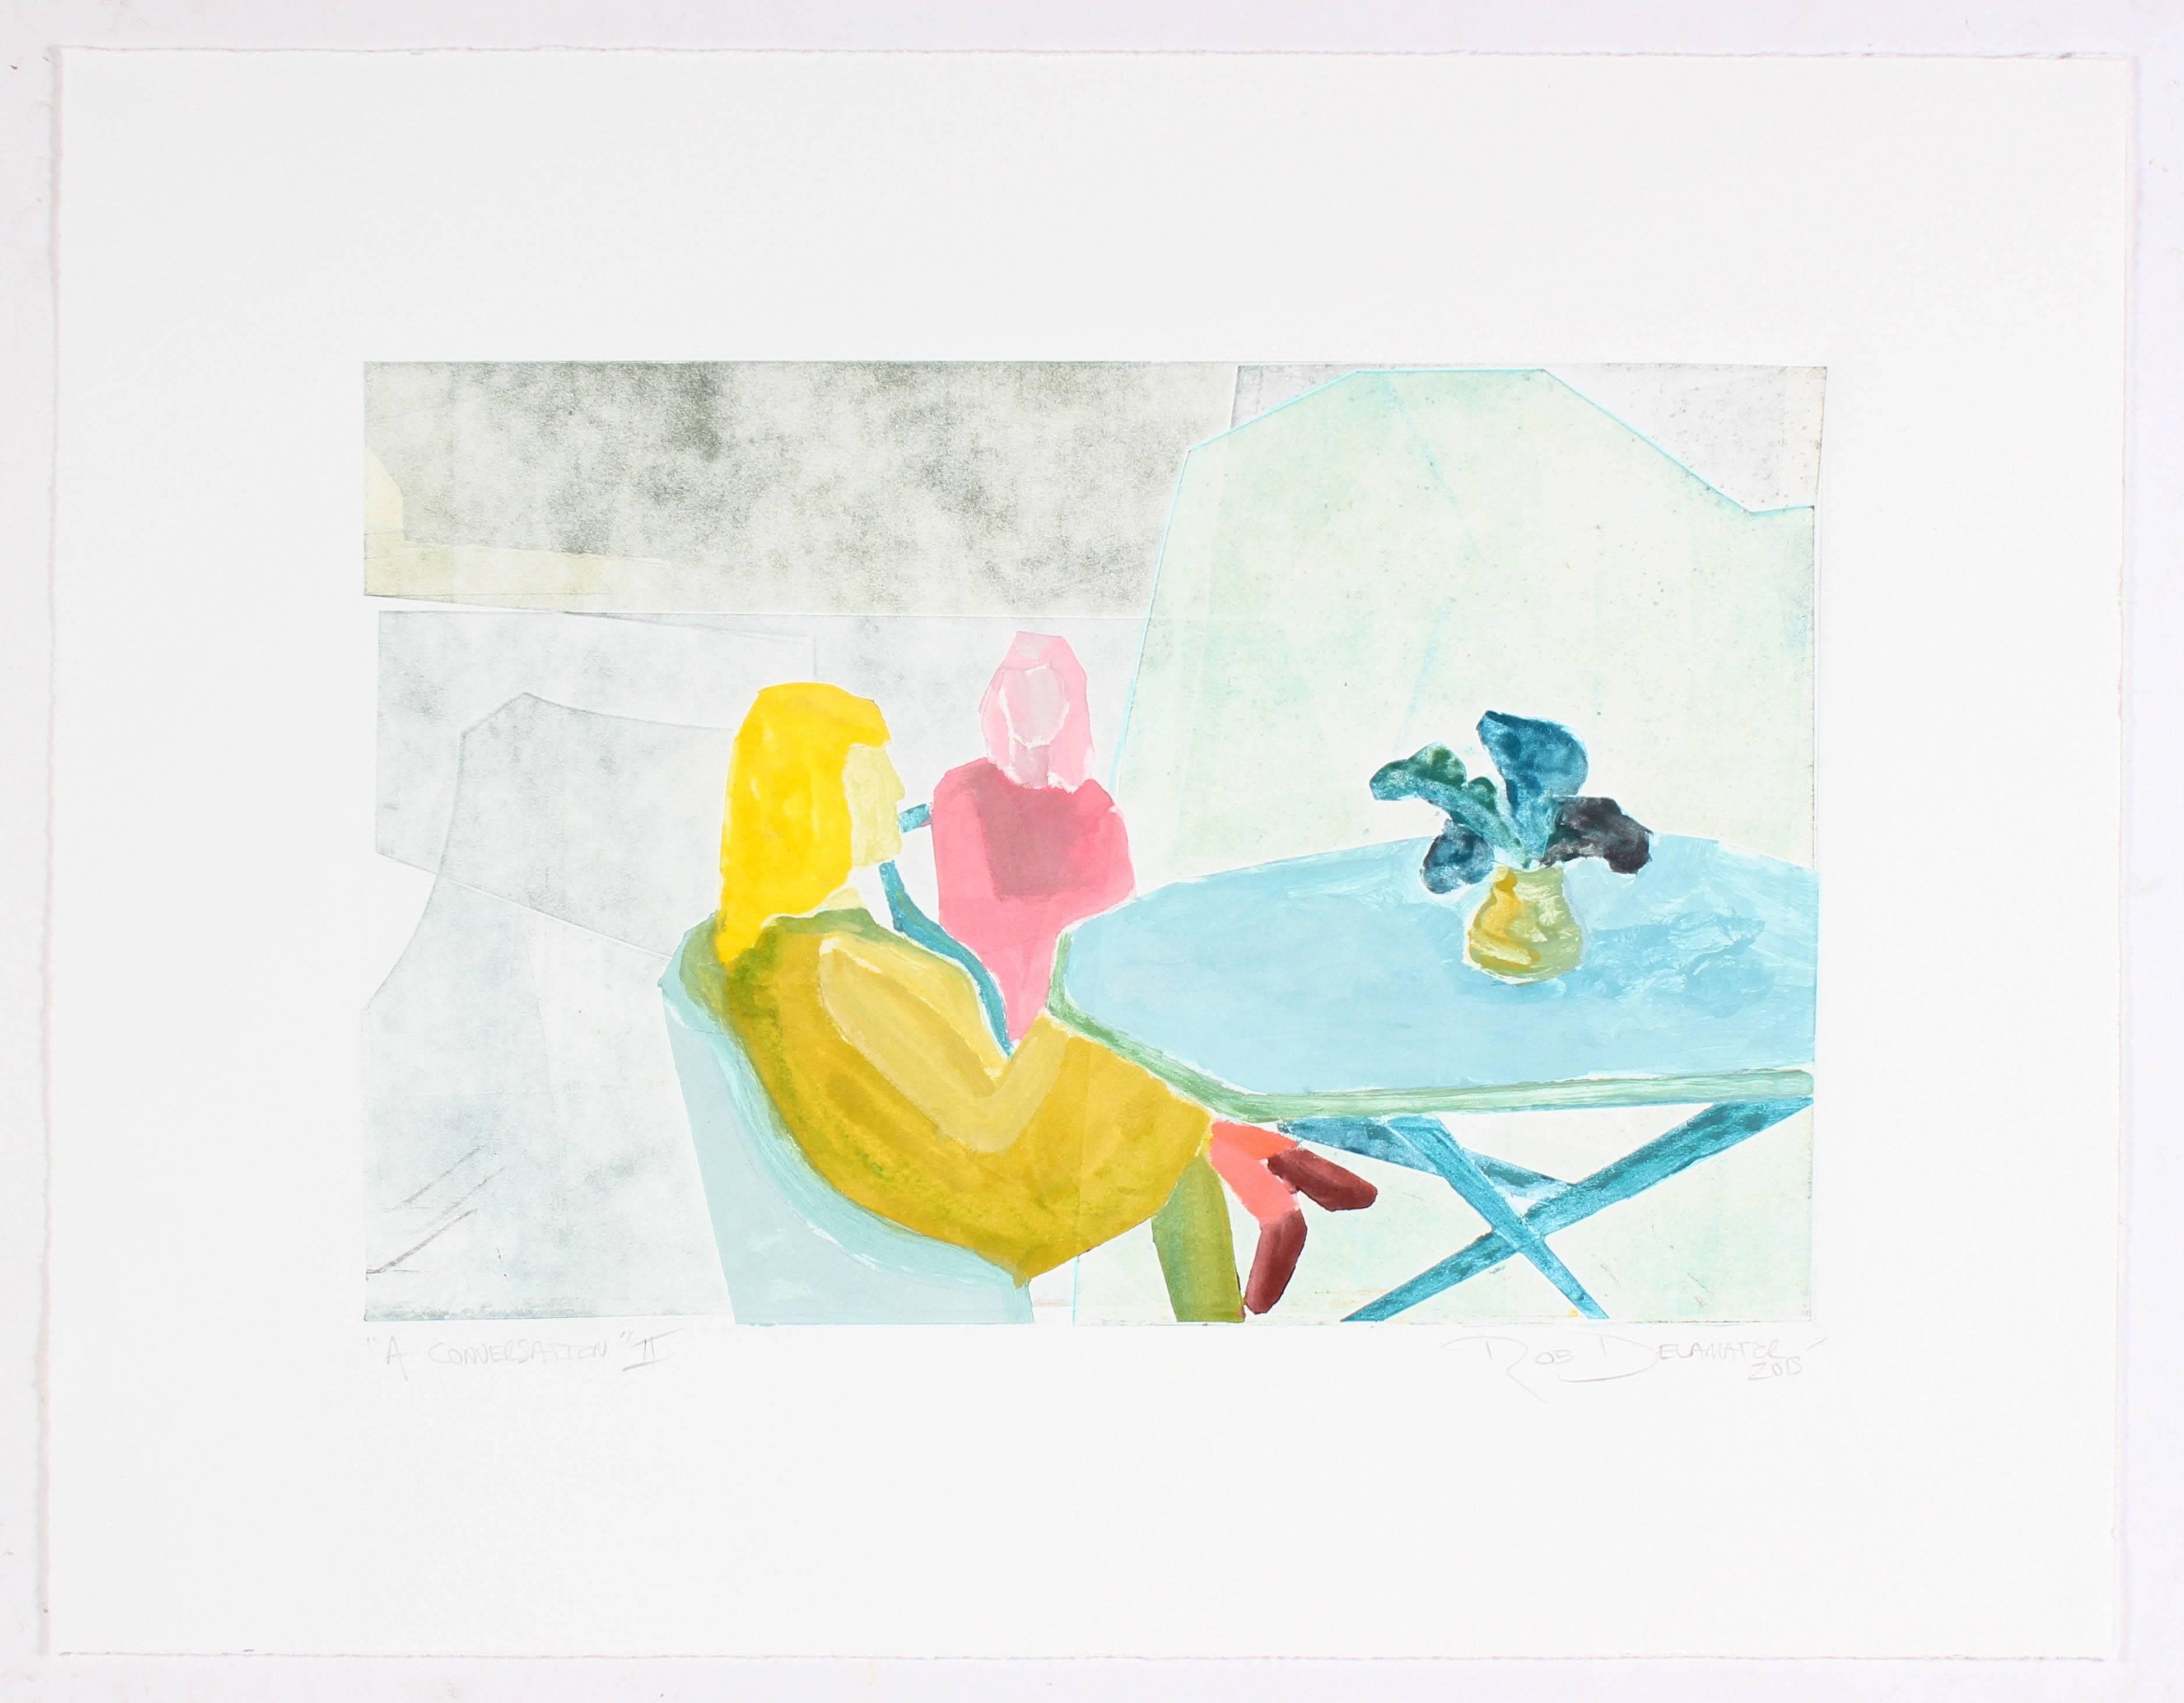 This 2015 monoprint and gouache on paper scene of two people at a table entitled 